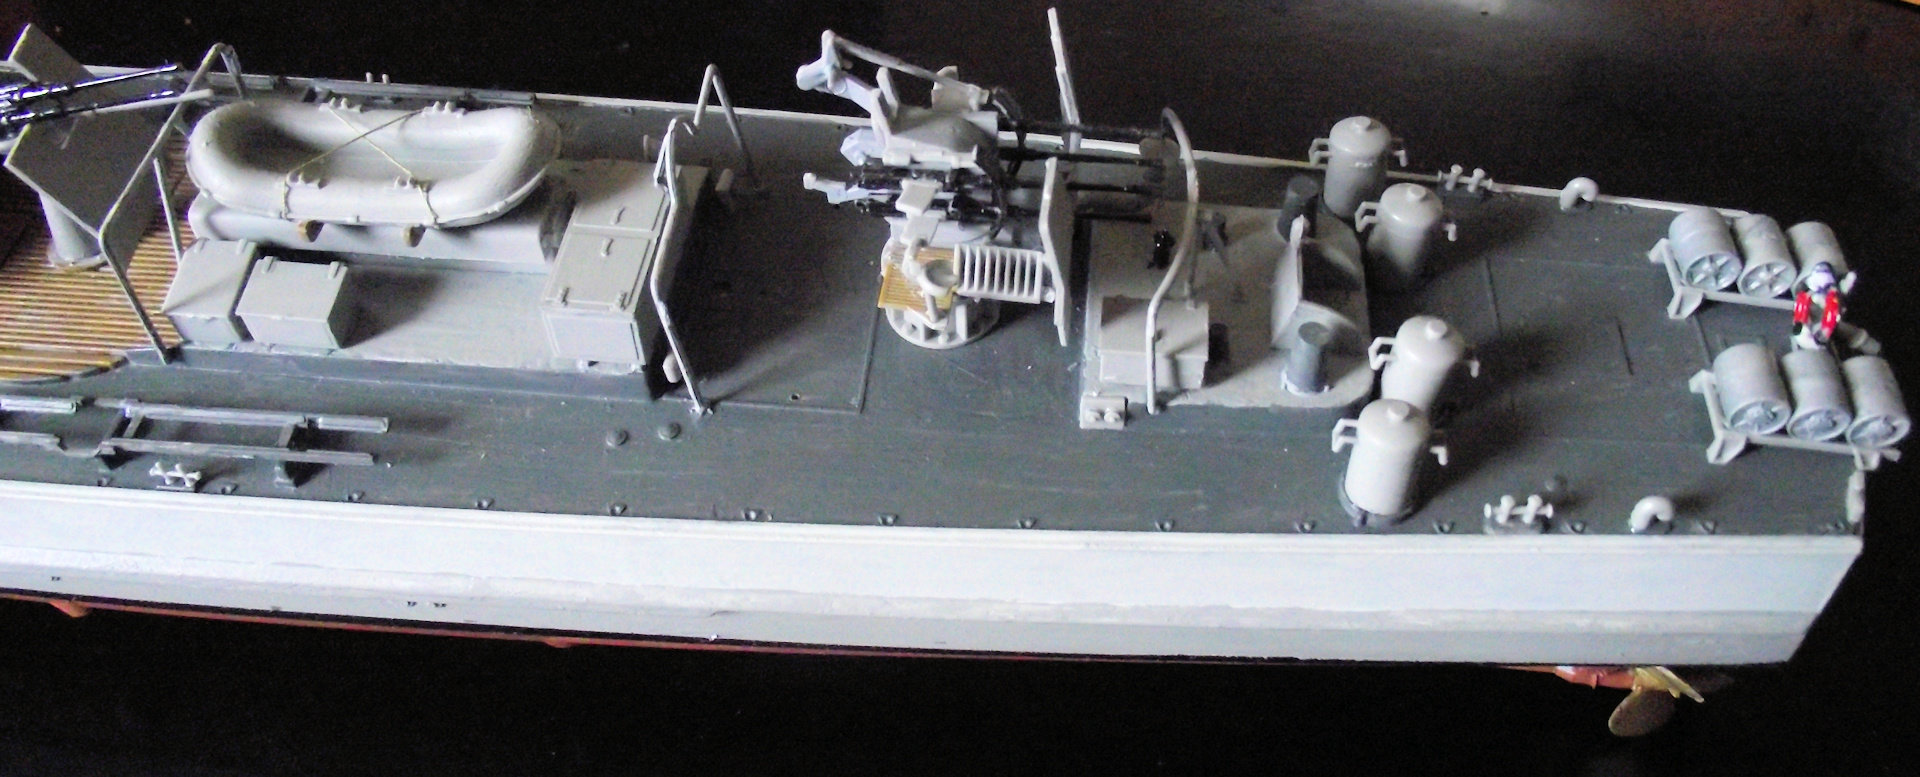 Schnellboat S100 Revell au 1x72 Limited Edition Ersk